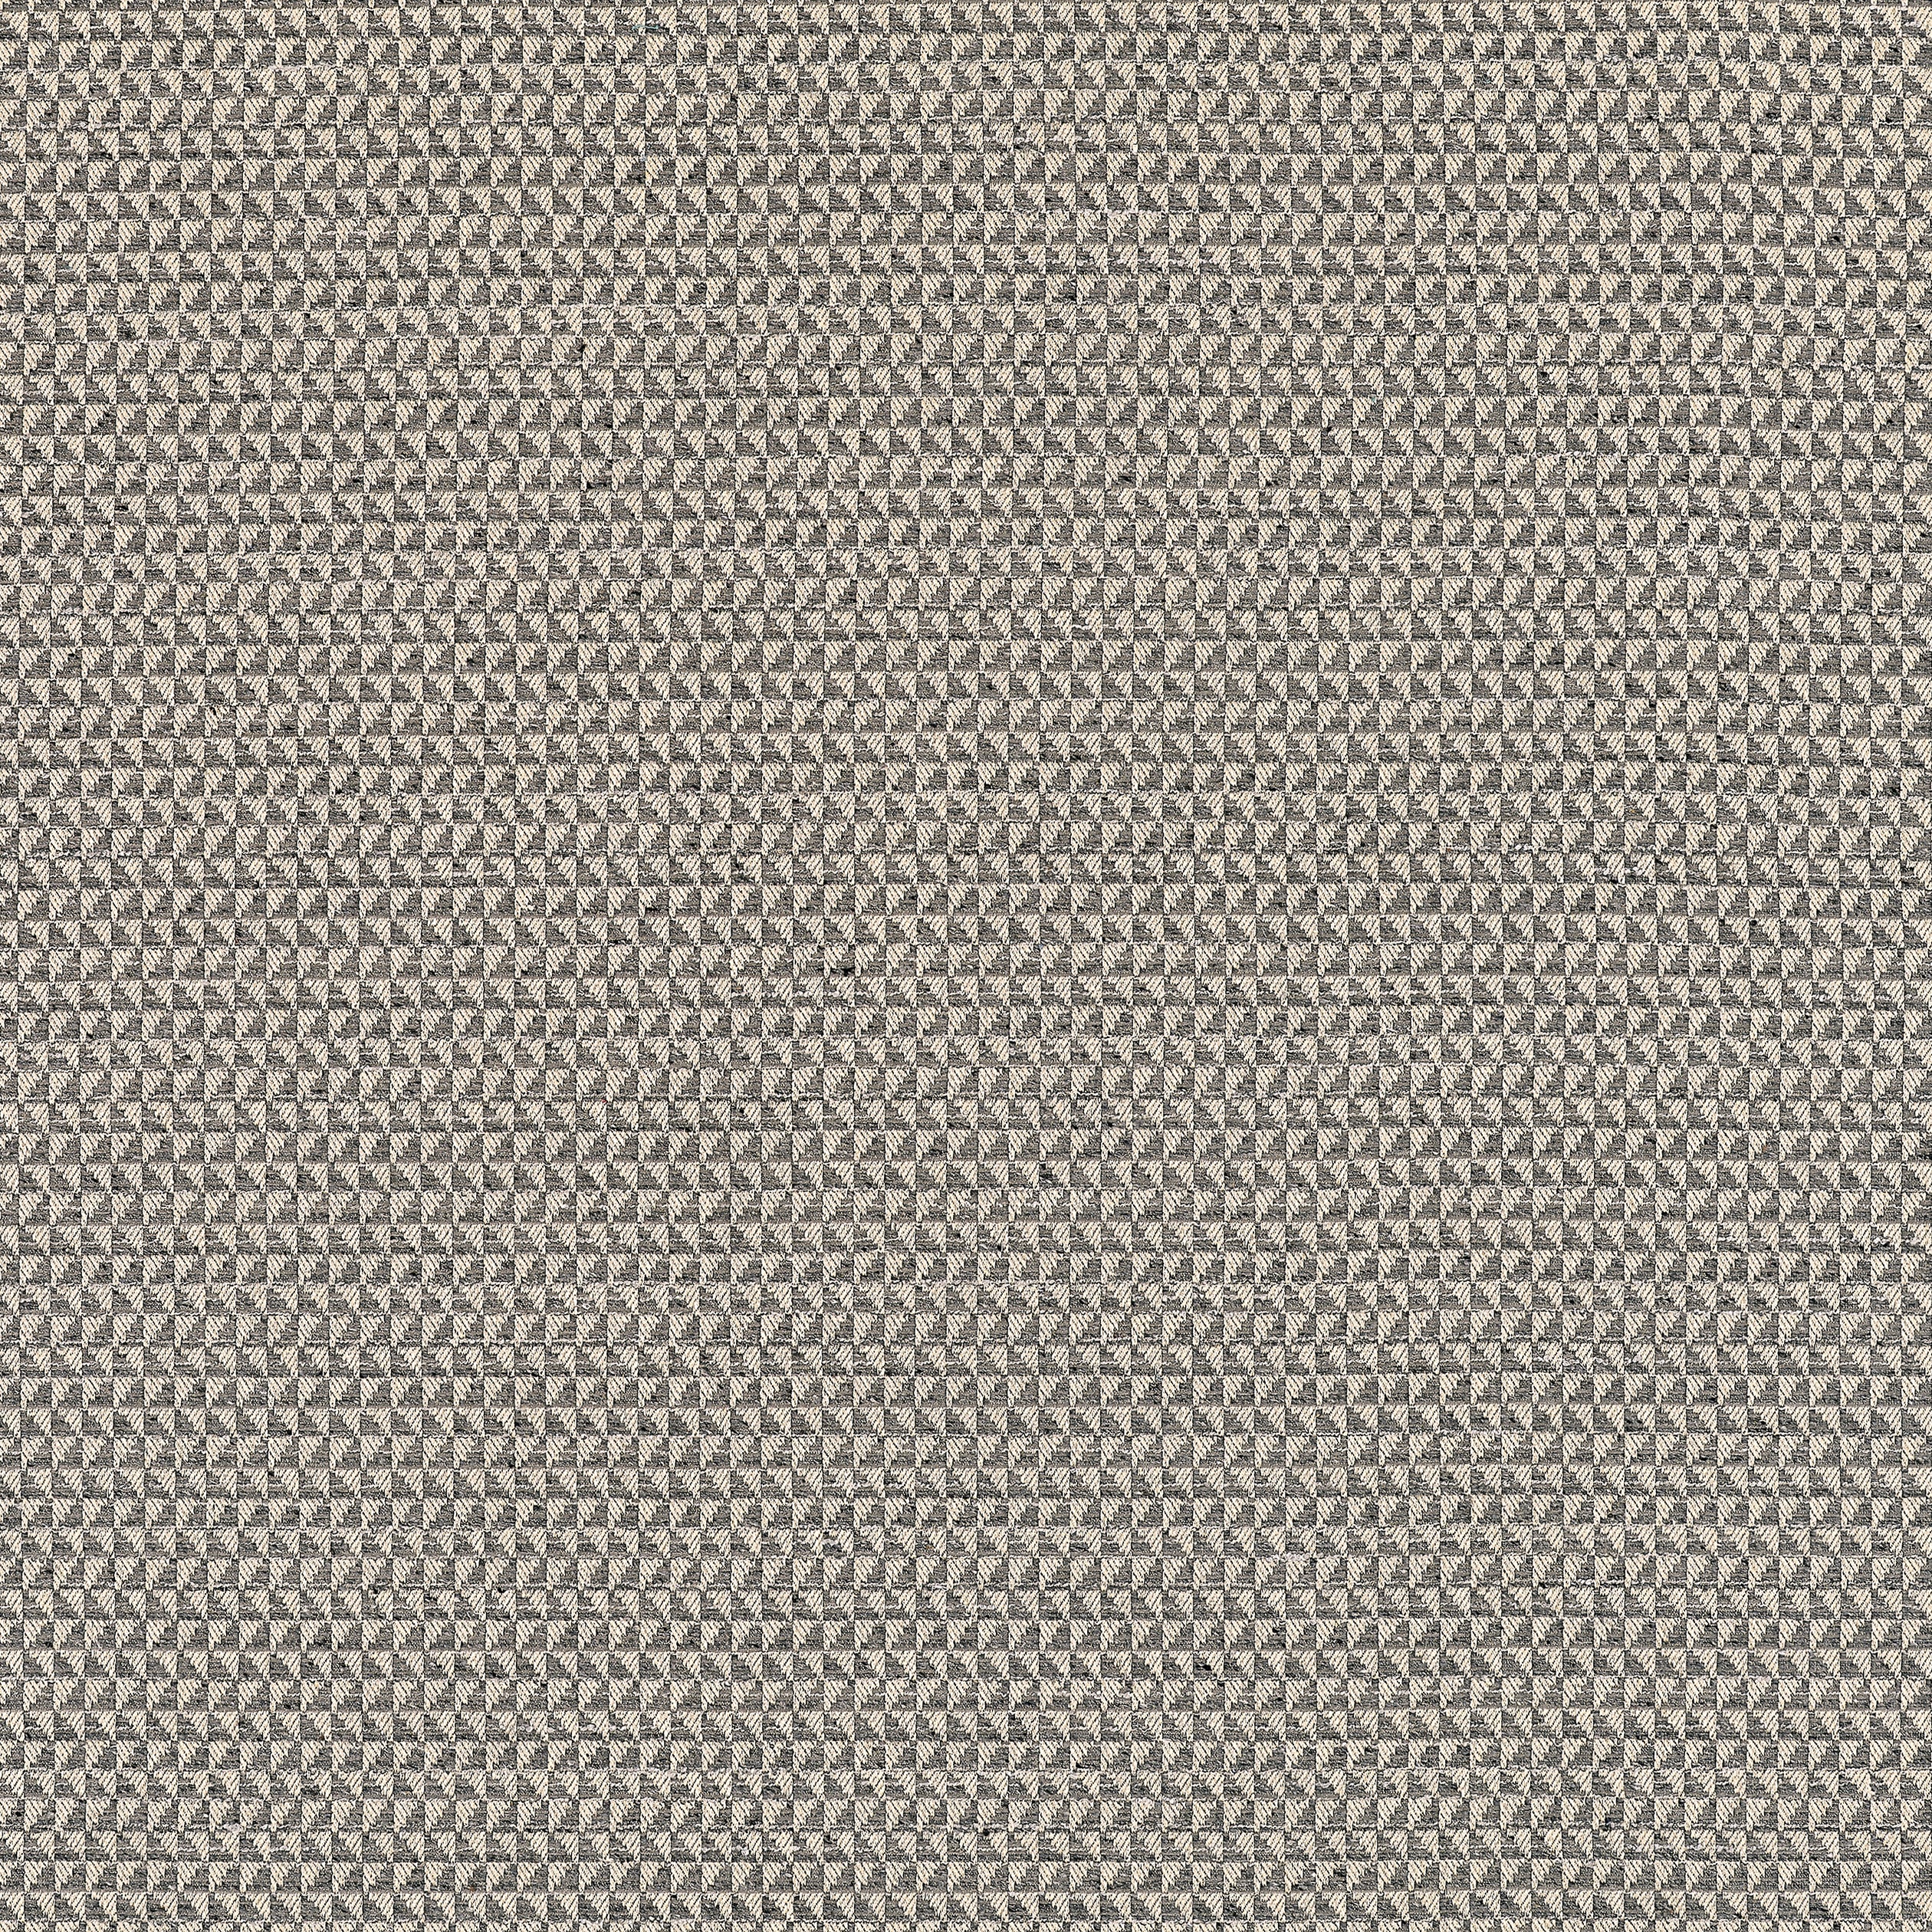 Pollux fabric in charcoal color - pattern number W81913 - by Thibaut in the Companions collection